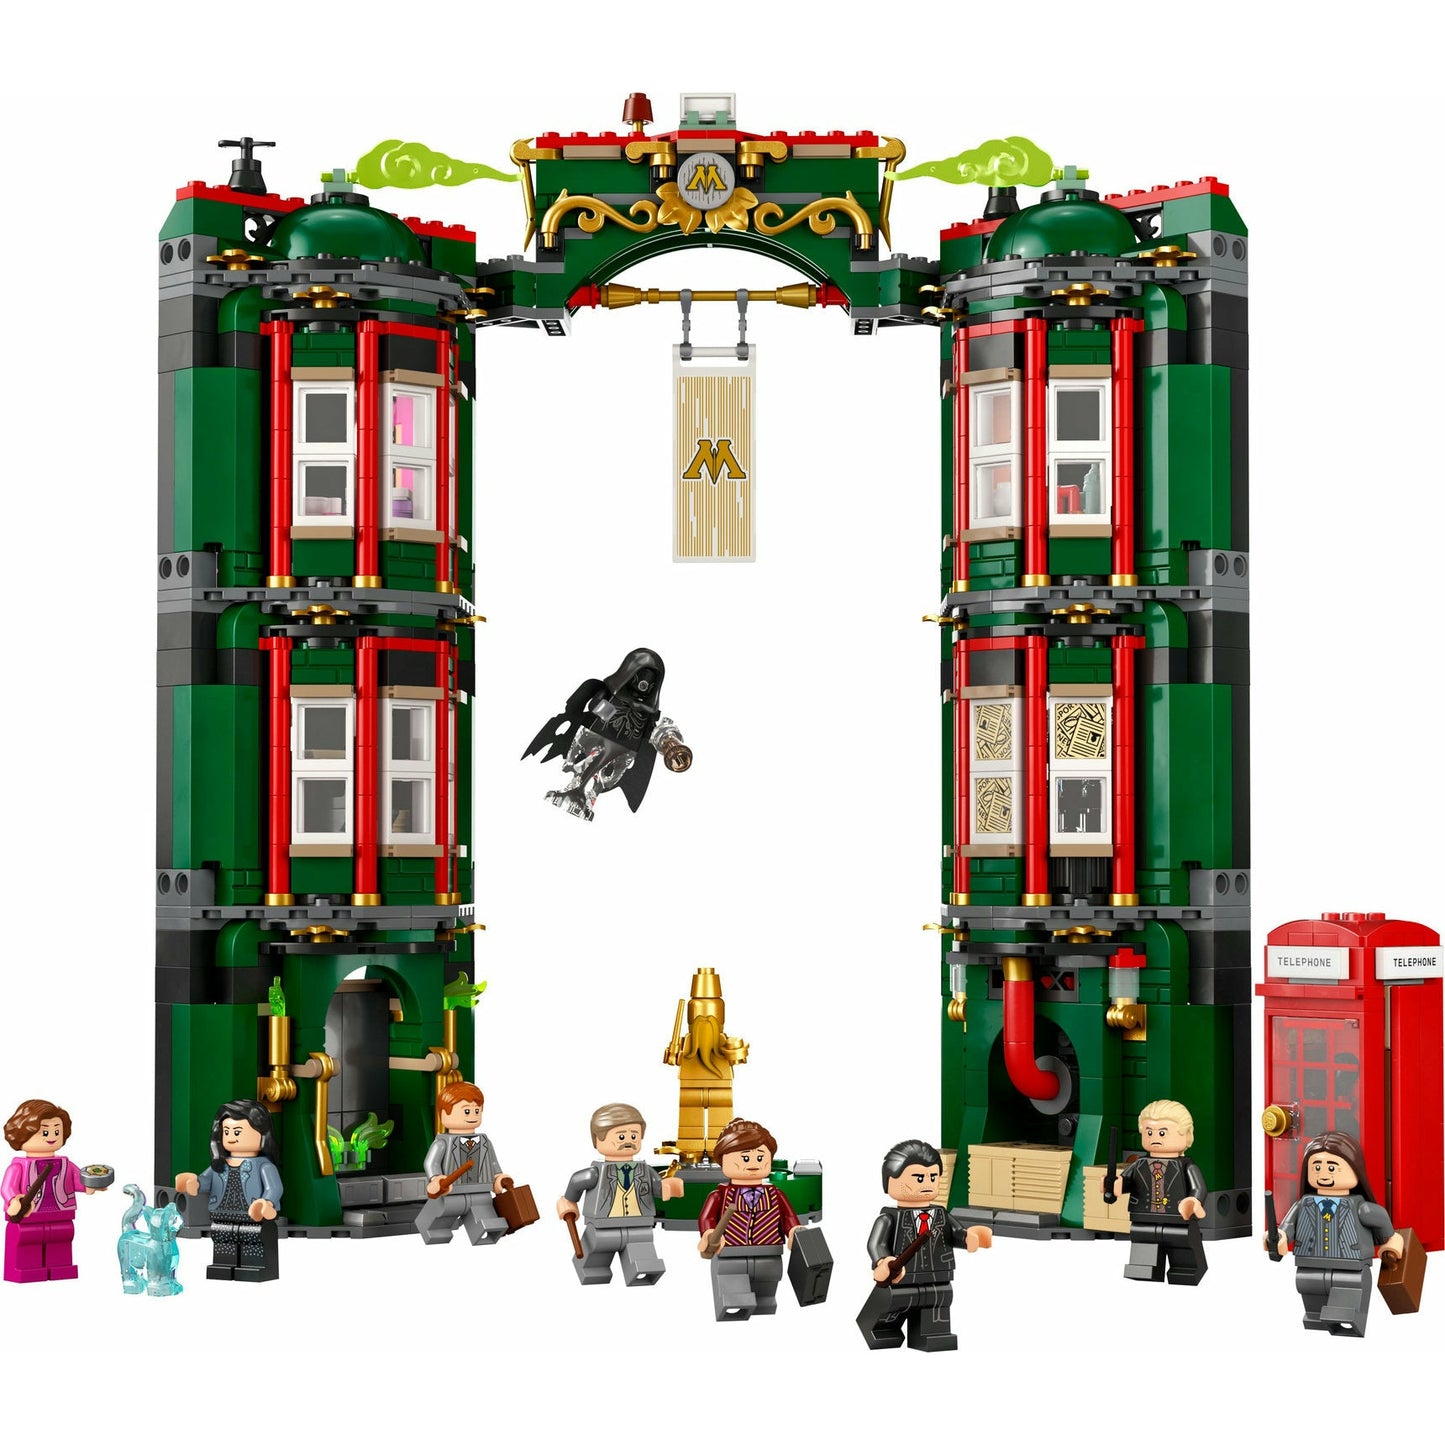 Lego Harry Potter The Ministry of Magic